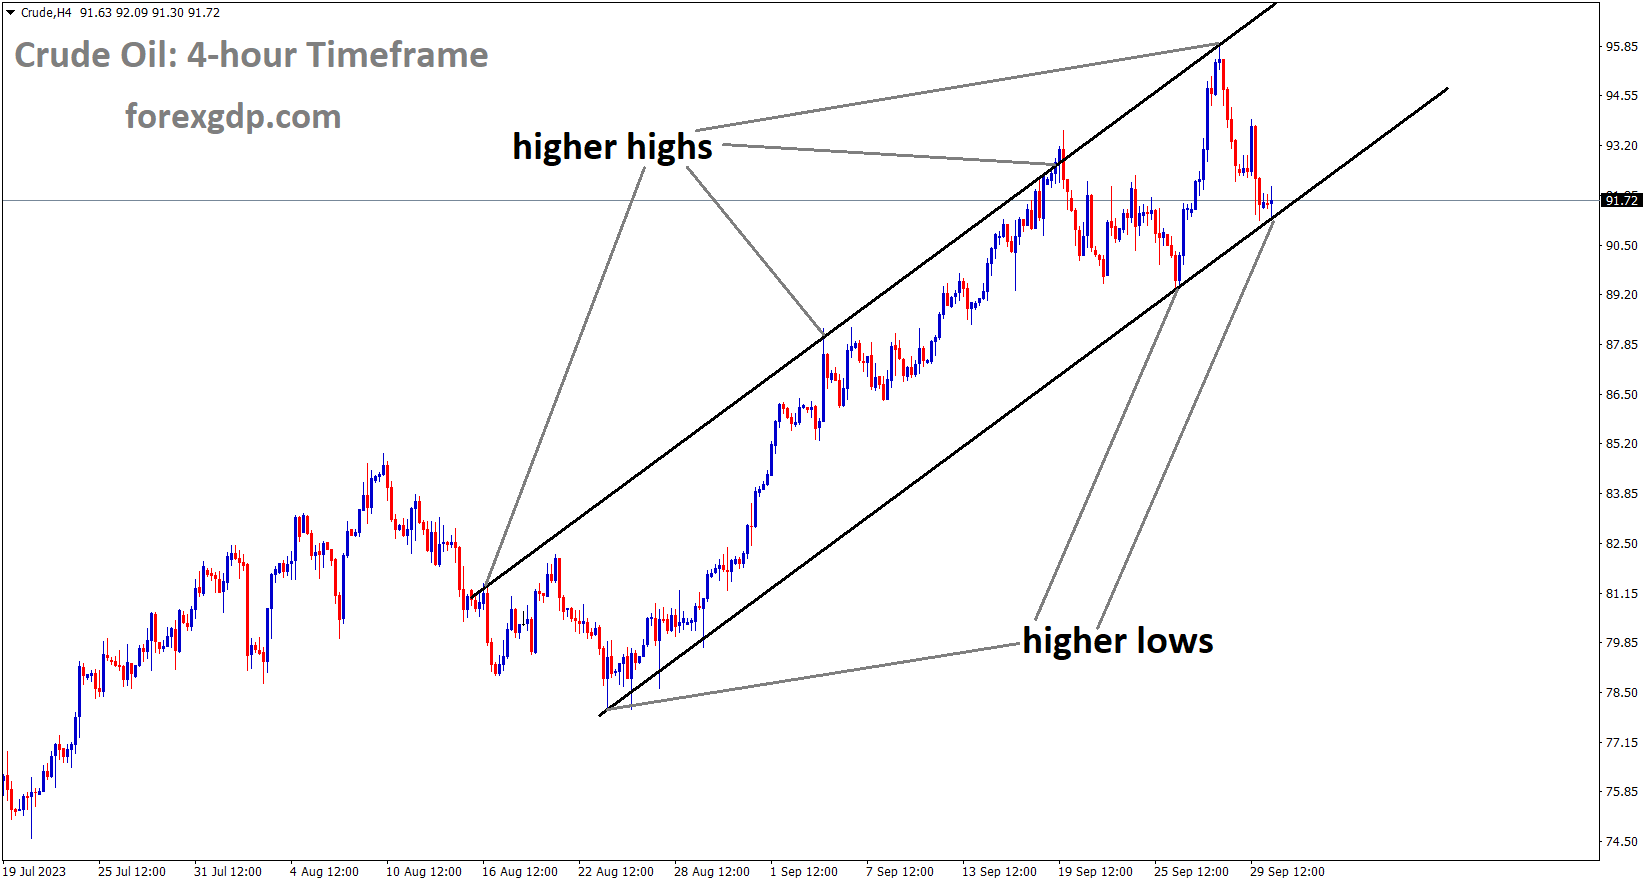 Crude Oil price is moving in an Ascending channel and the market has reached the higher low area of the channel